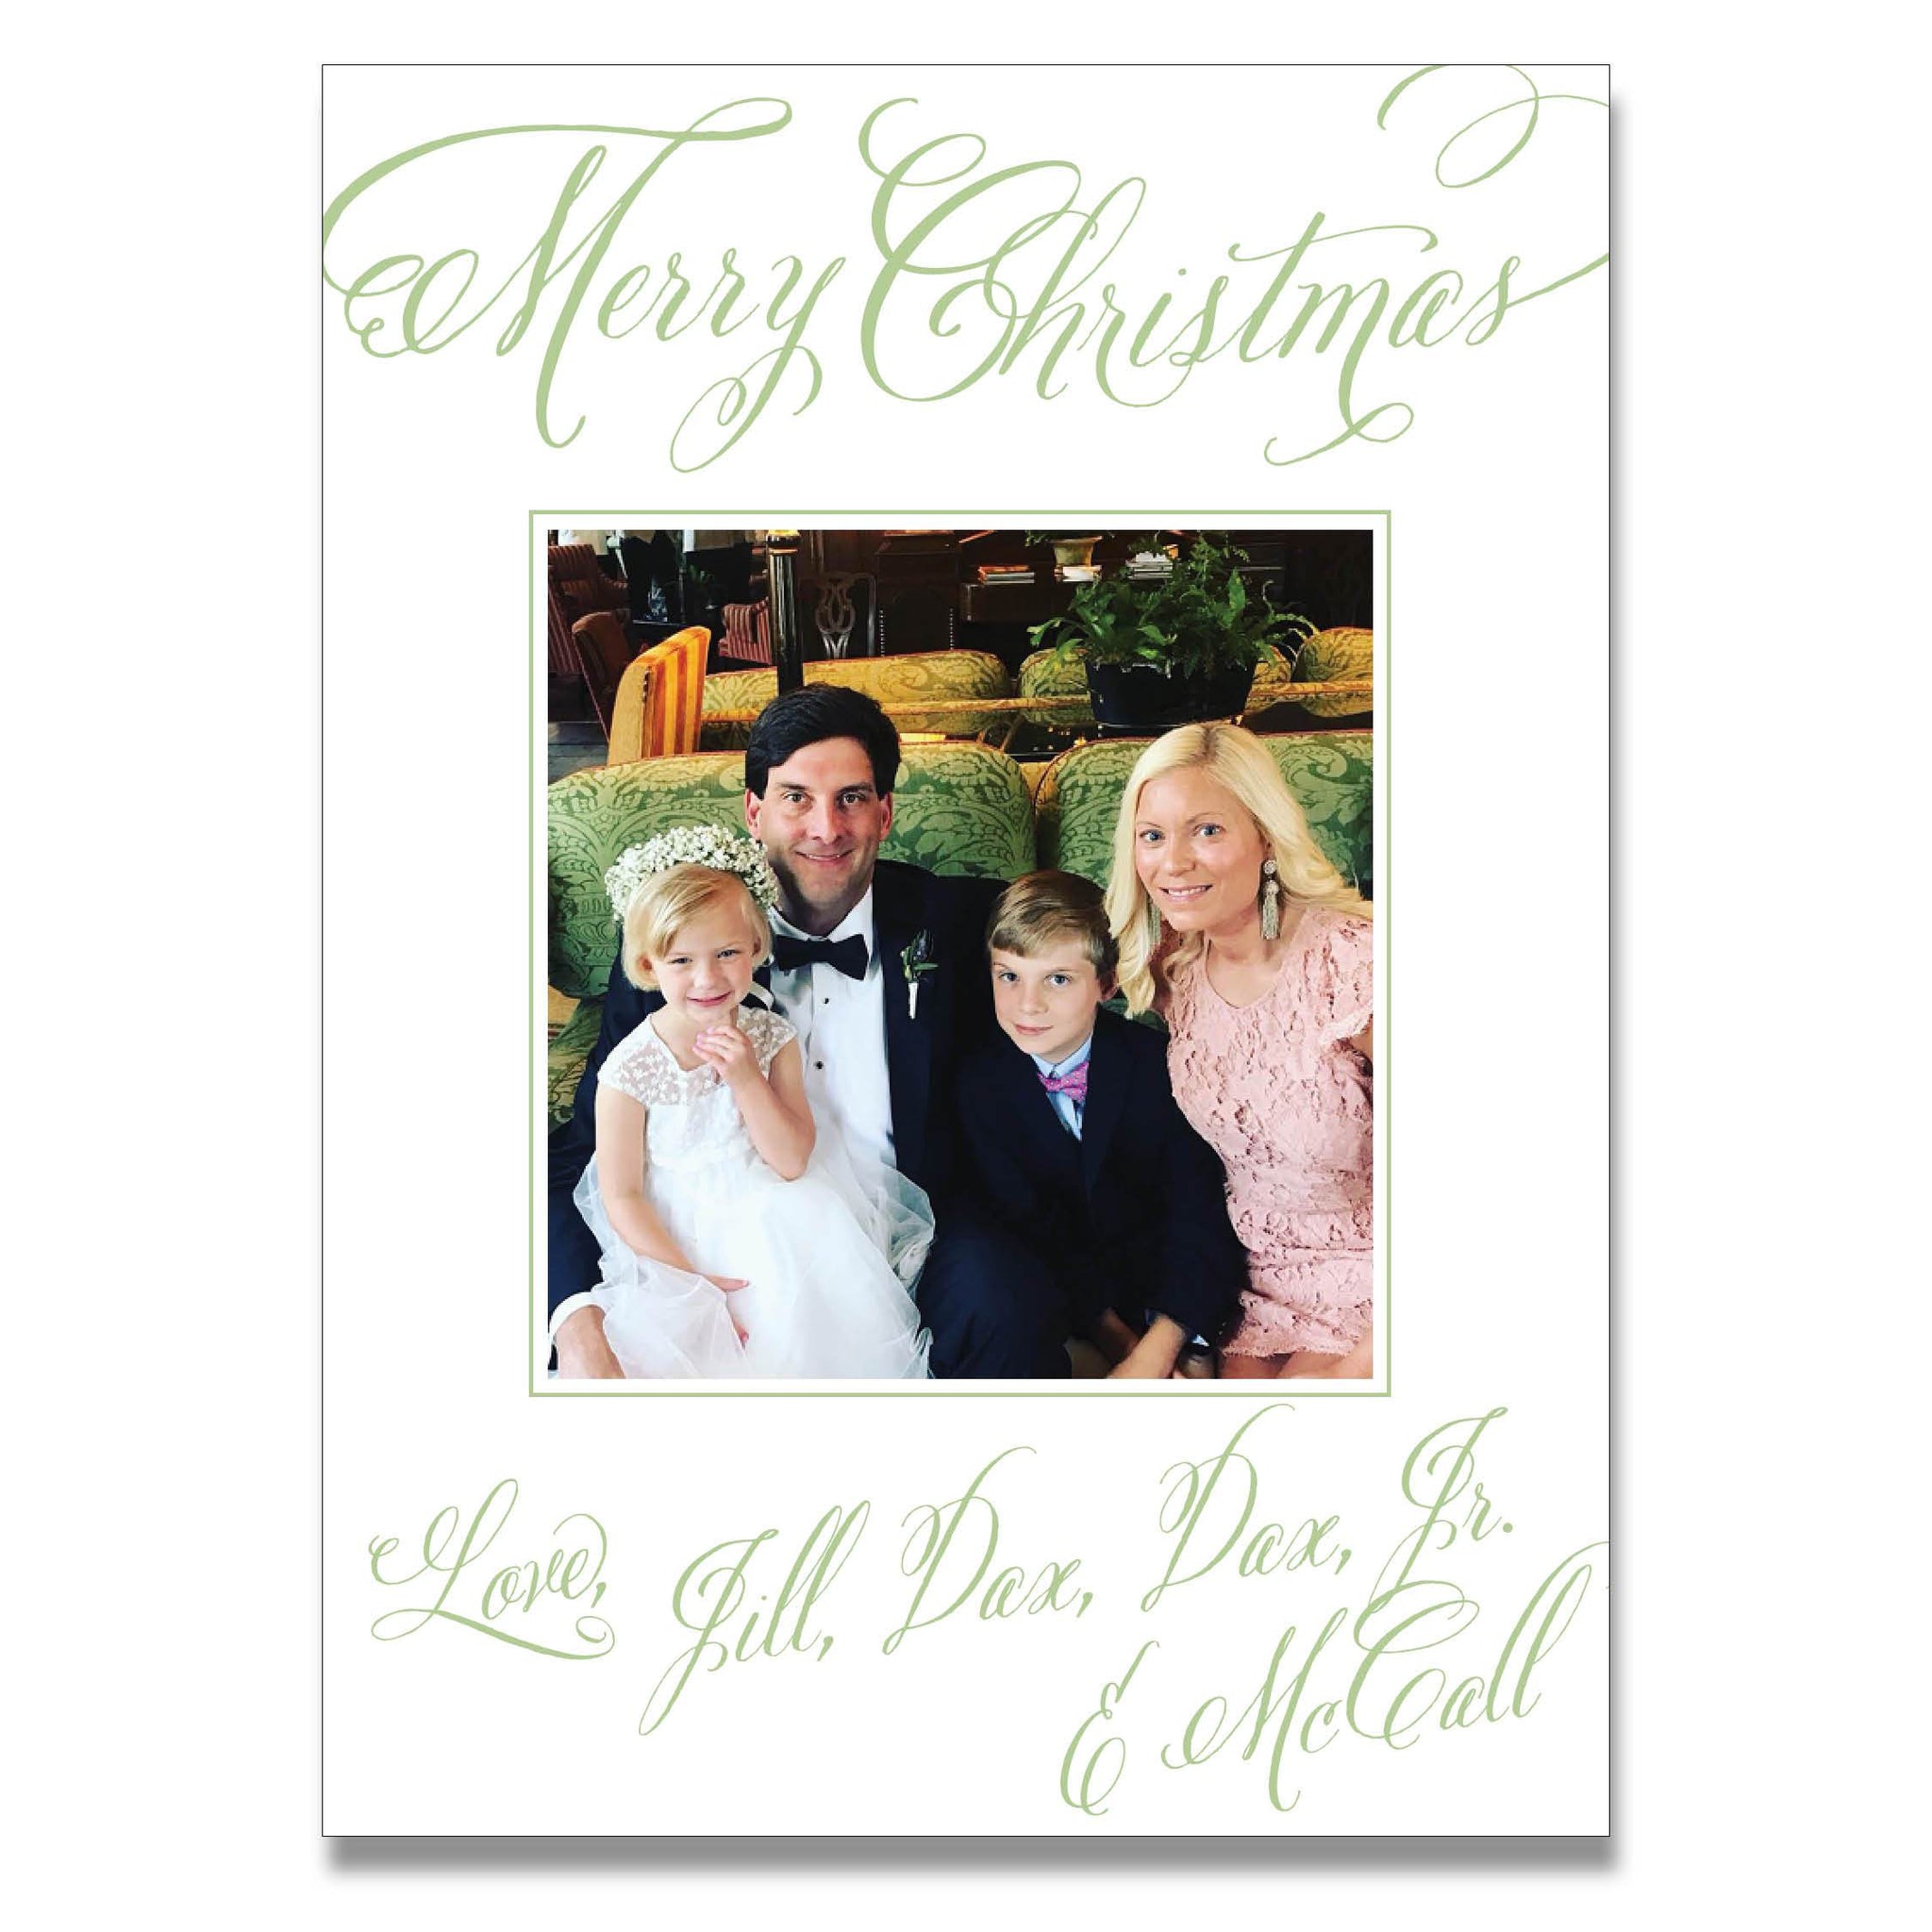 Merry Calligraphy Green Holiday Card